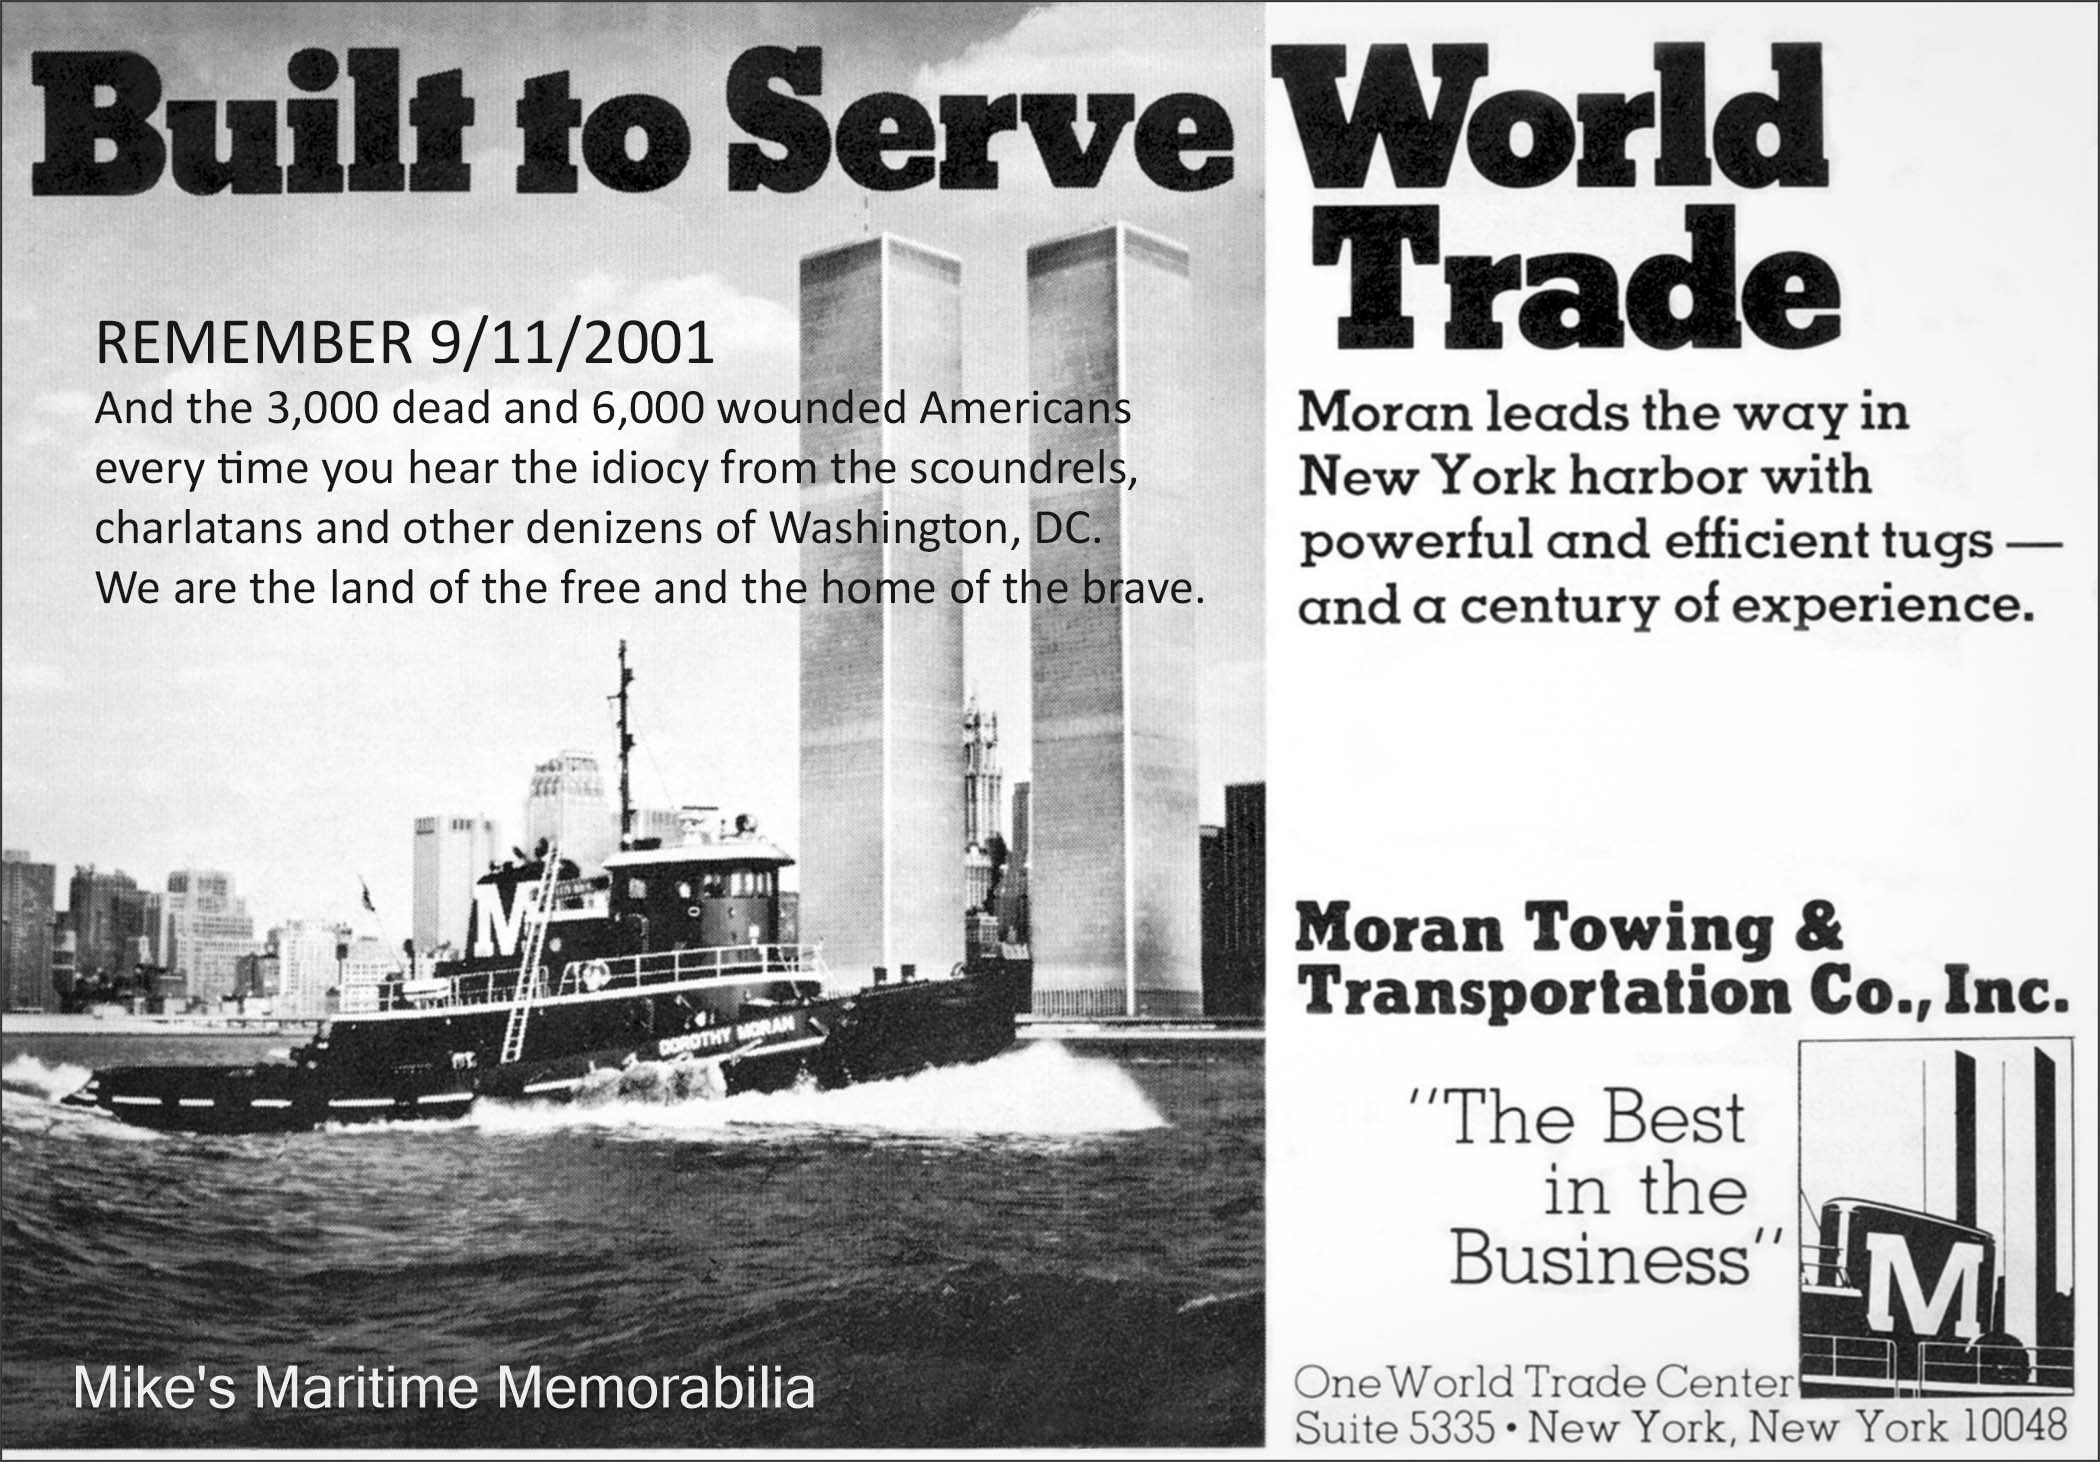 Moran Towing & Transportation Co. – 1985 Moran Towing & Transportation Co., Inc. advertisement circa 1985. At the time, Moran had most of the tugboat business in New York Harbor. Founded in 1896 in New York City, Moran was one of the first tenants to move into the World Trade Center. In fact, construction on the first tower was ongoing when Moran took occupancy of the 53rd floor.